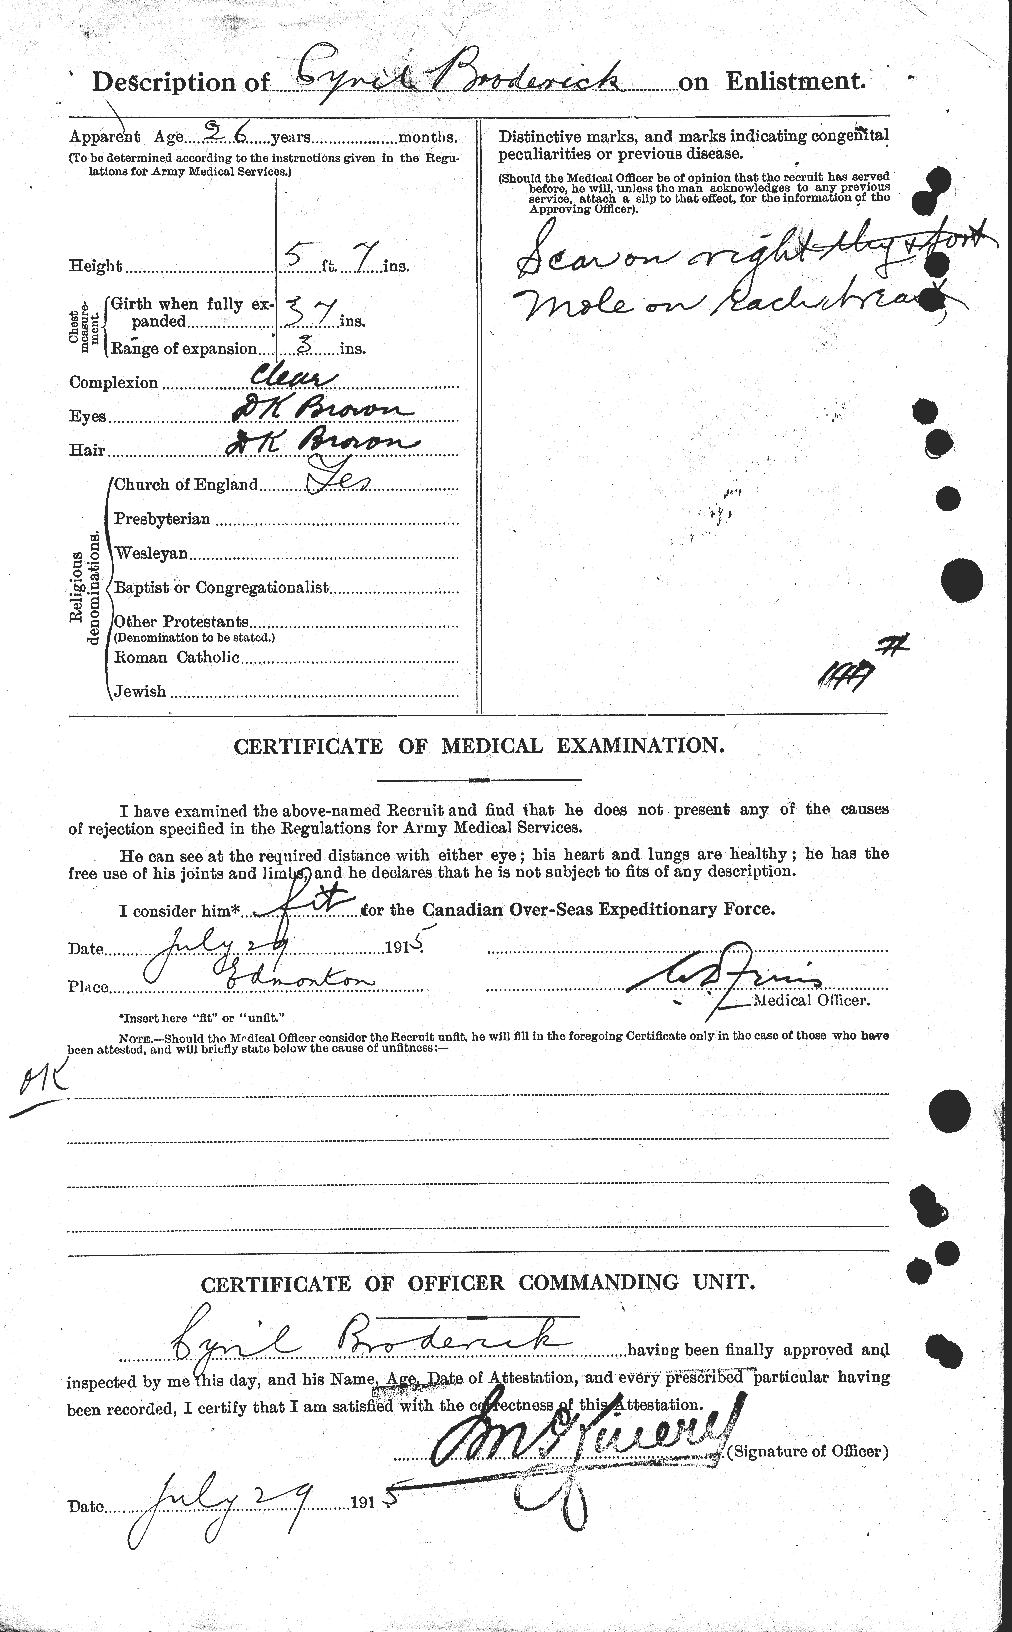 Personnel Records of the First World War - CEF 260967b